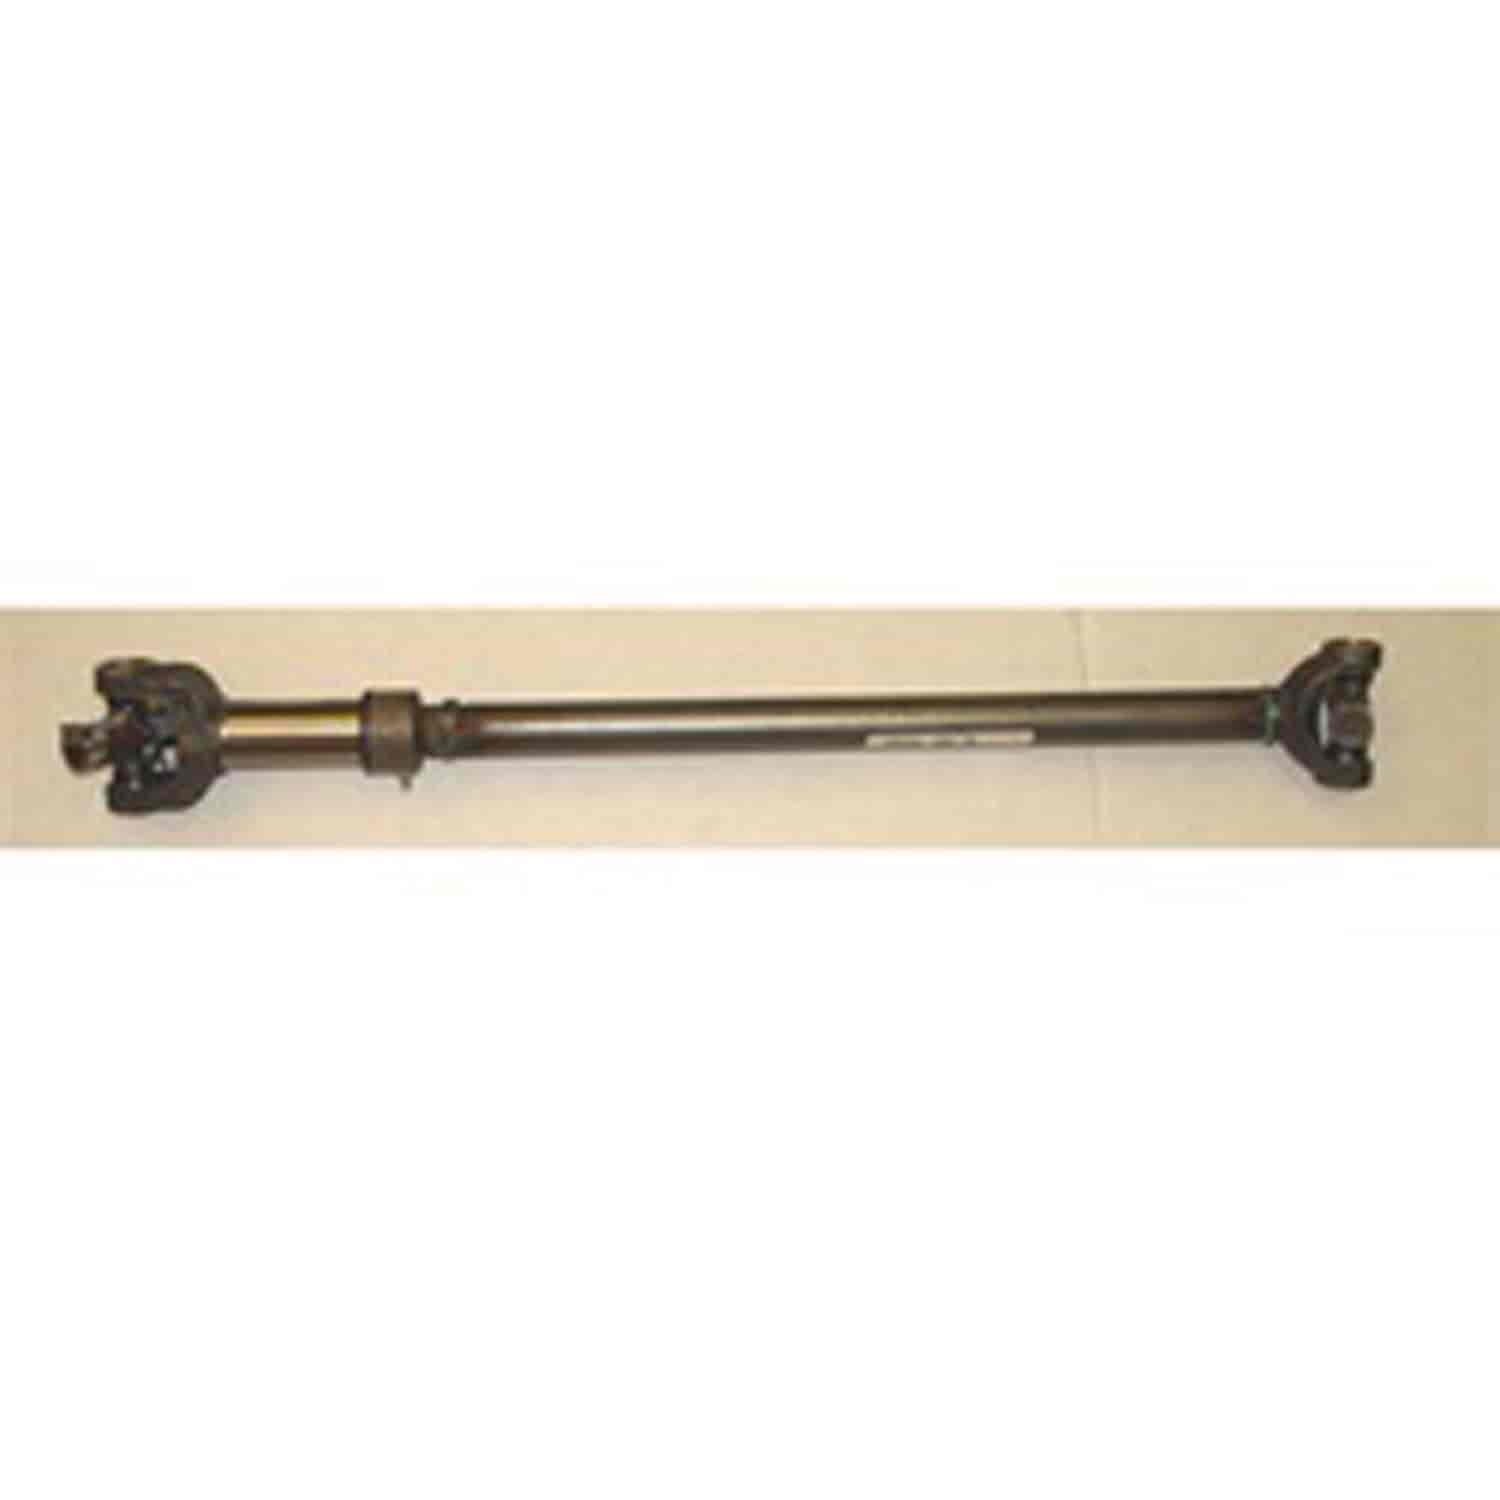 Replacement front driveshaft from Omix-ADA, Fits 80-86 Jeep